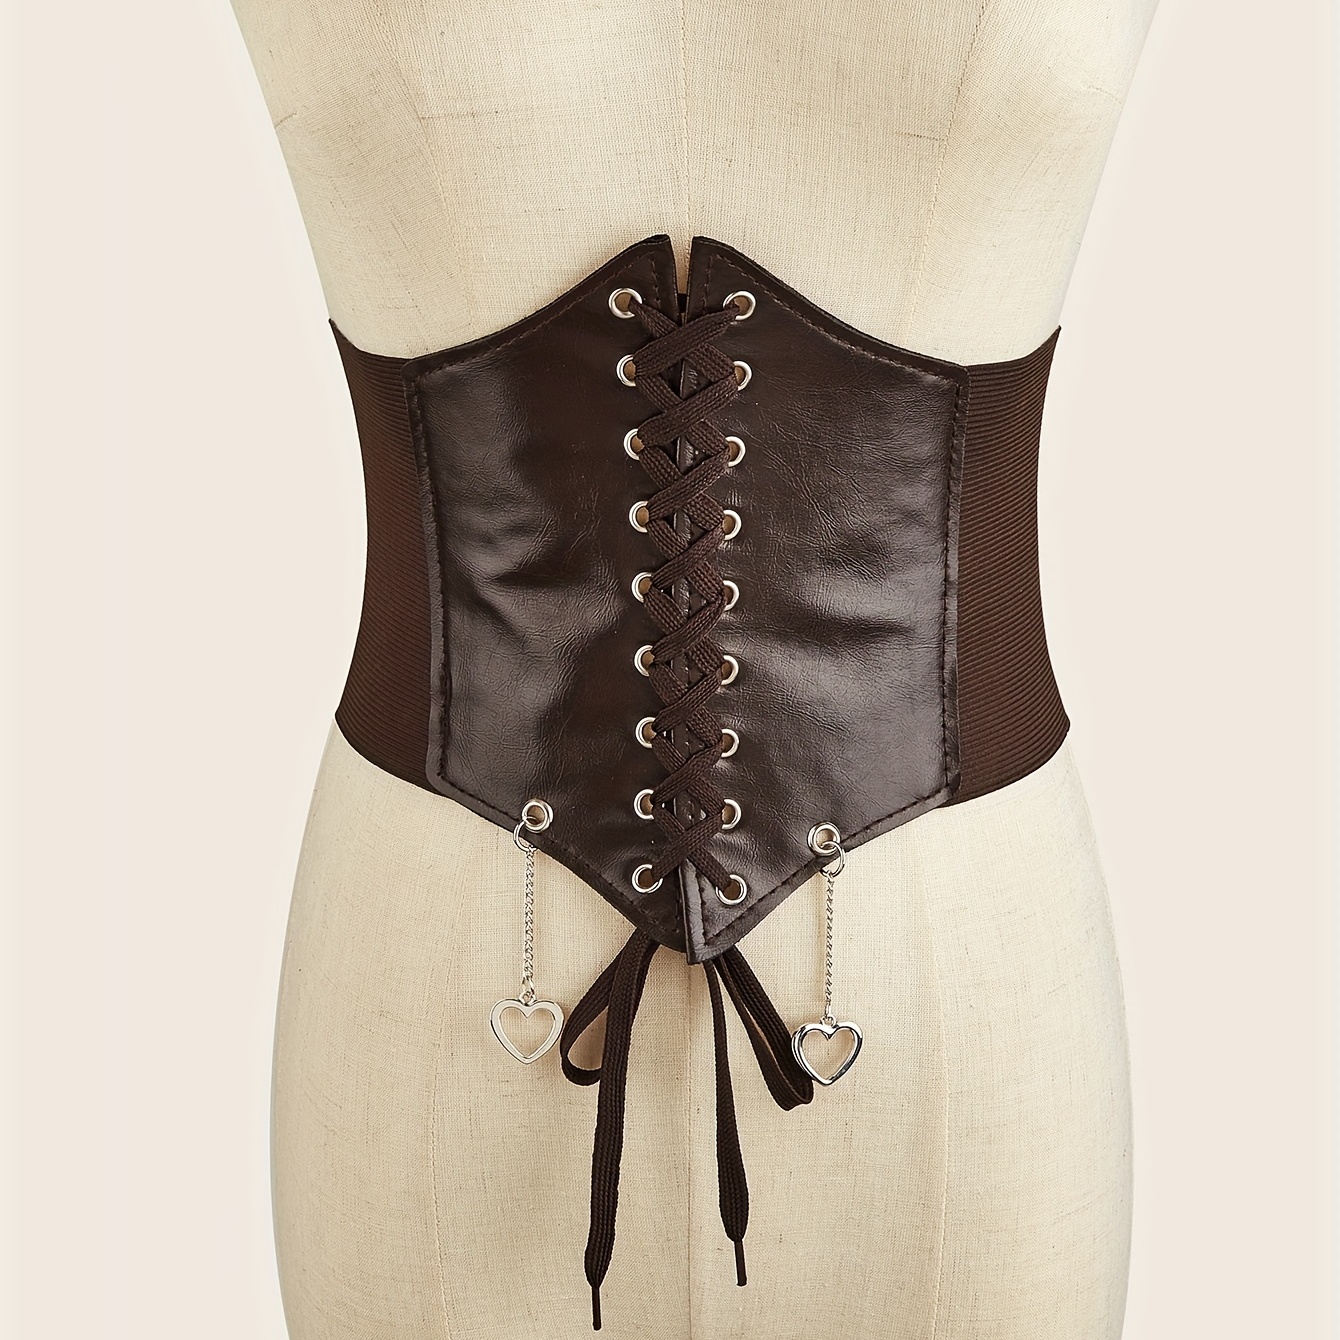 Leather Lace Up and Steampunk Fashion Corset Belts